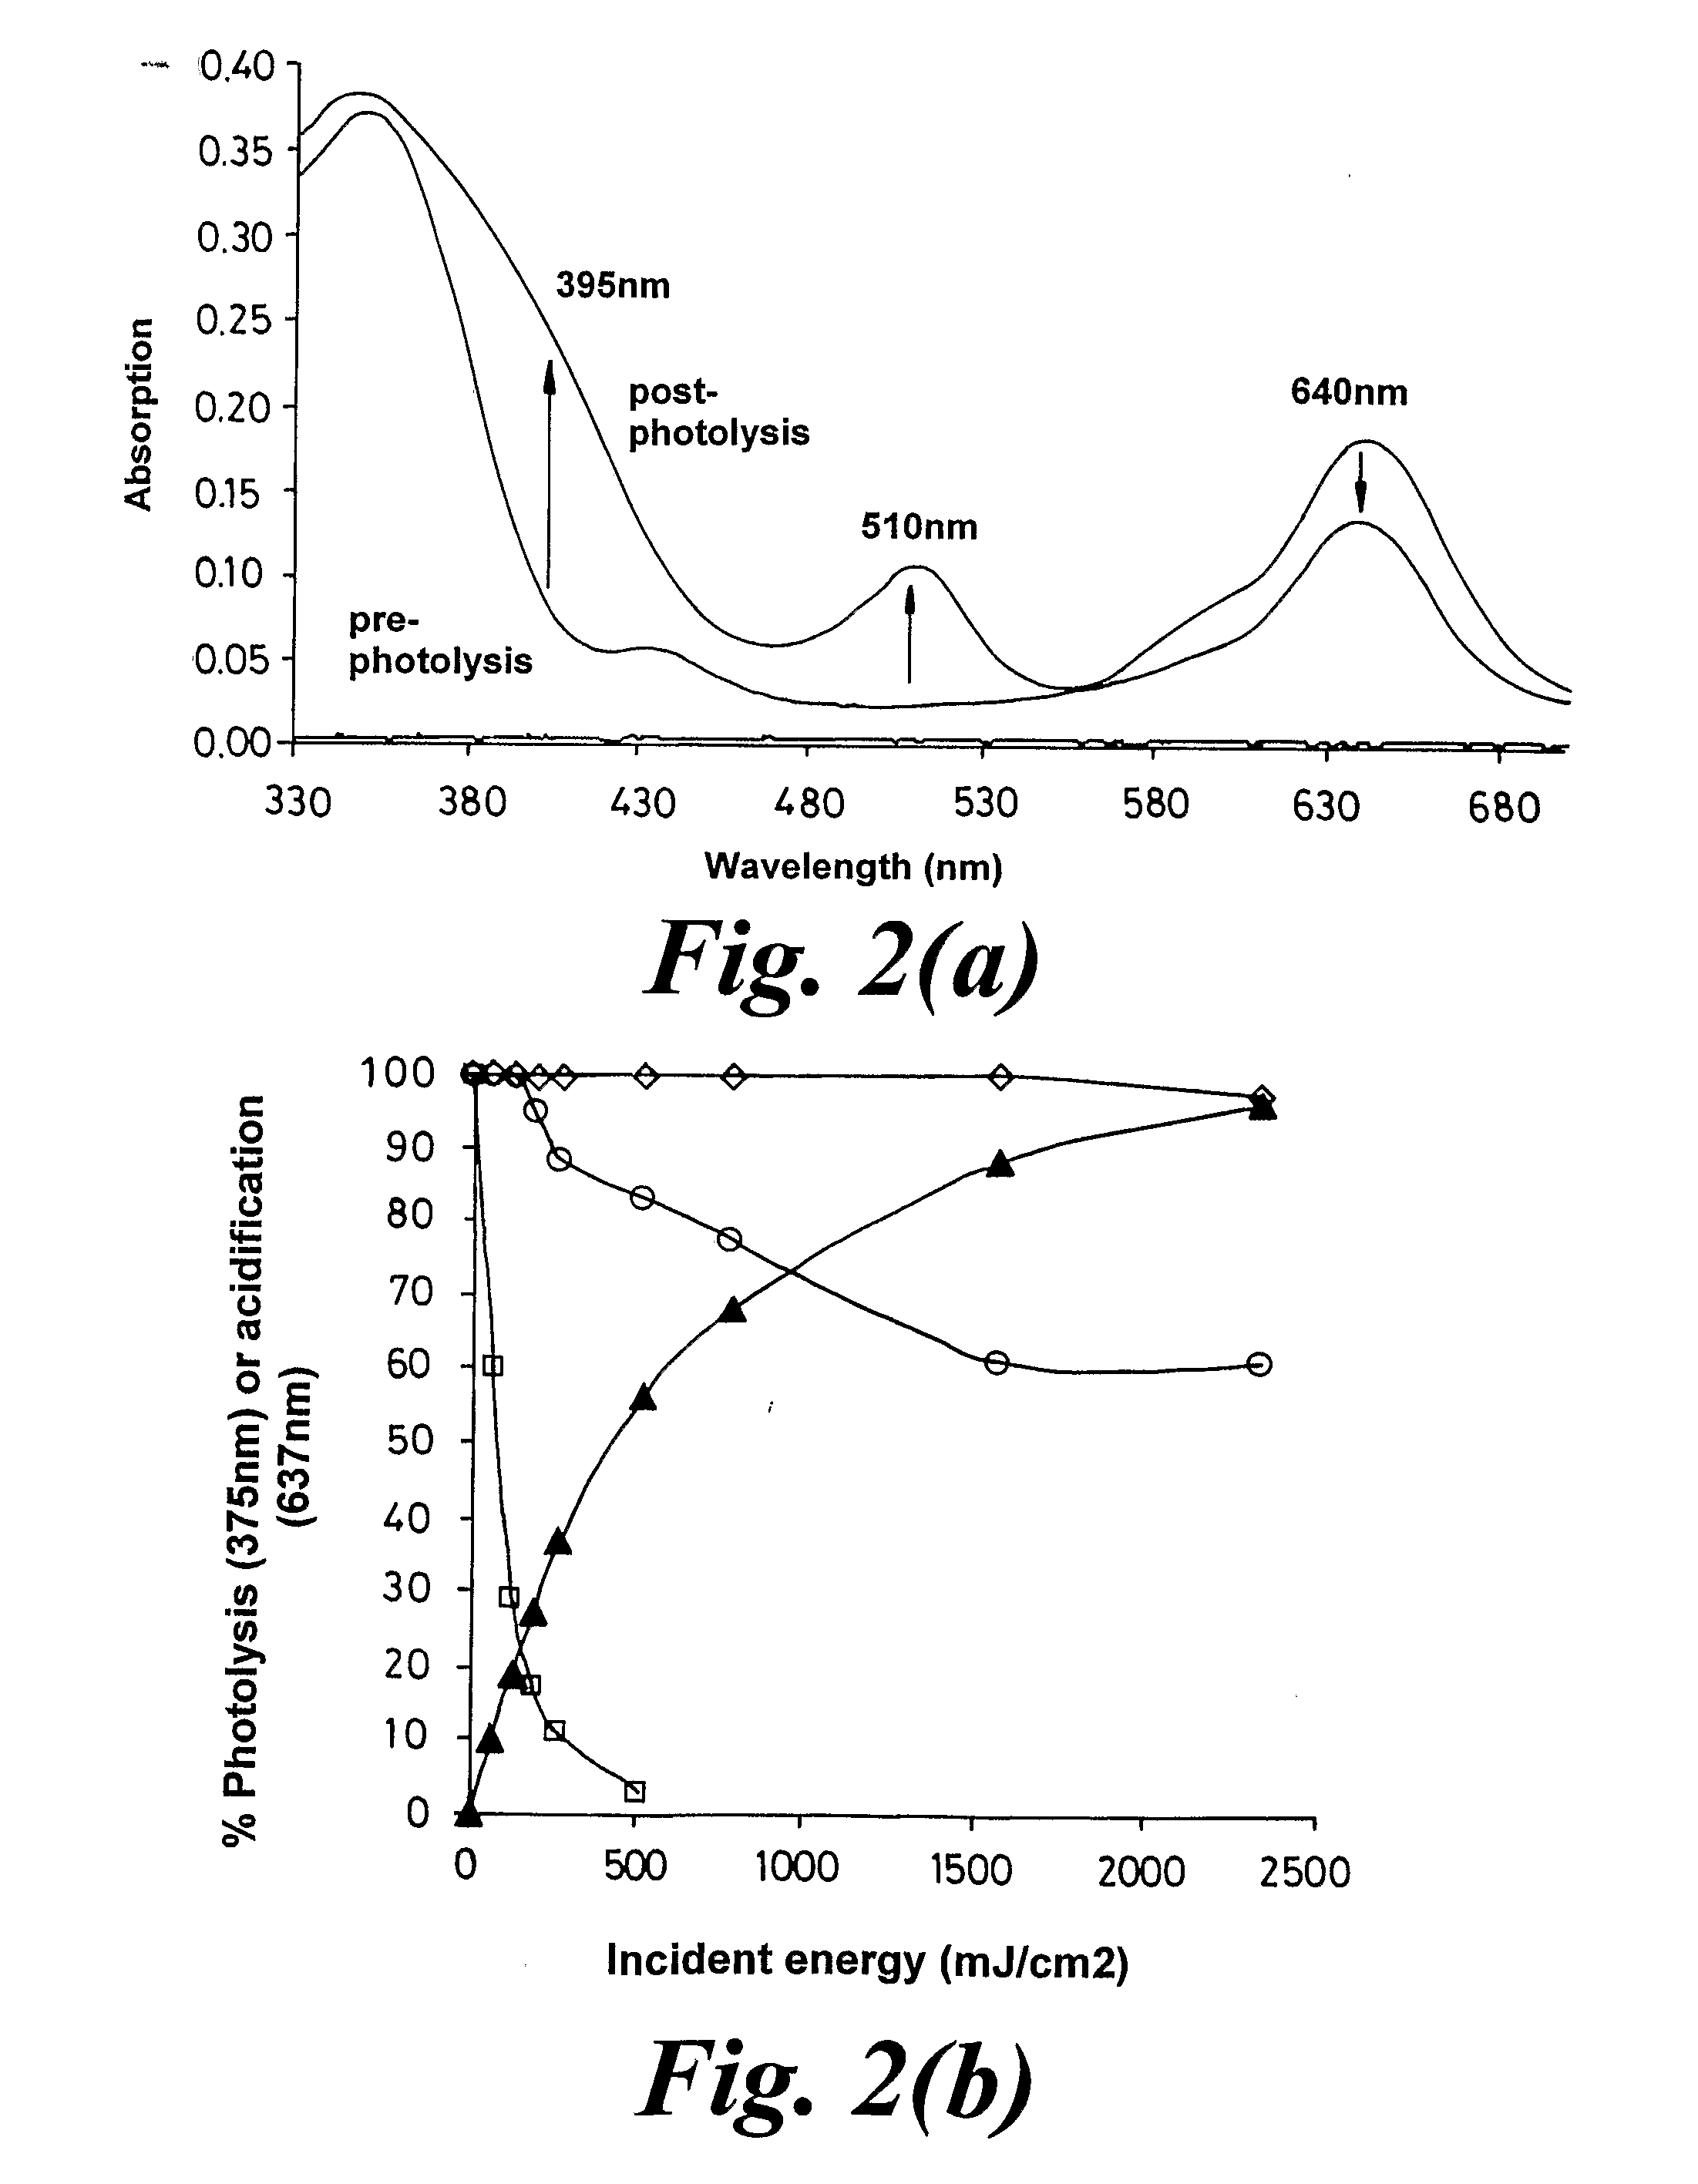 Materials and Methods for the Photodirected Synthesis of Oligonucleotide Arrays